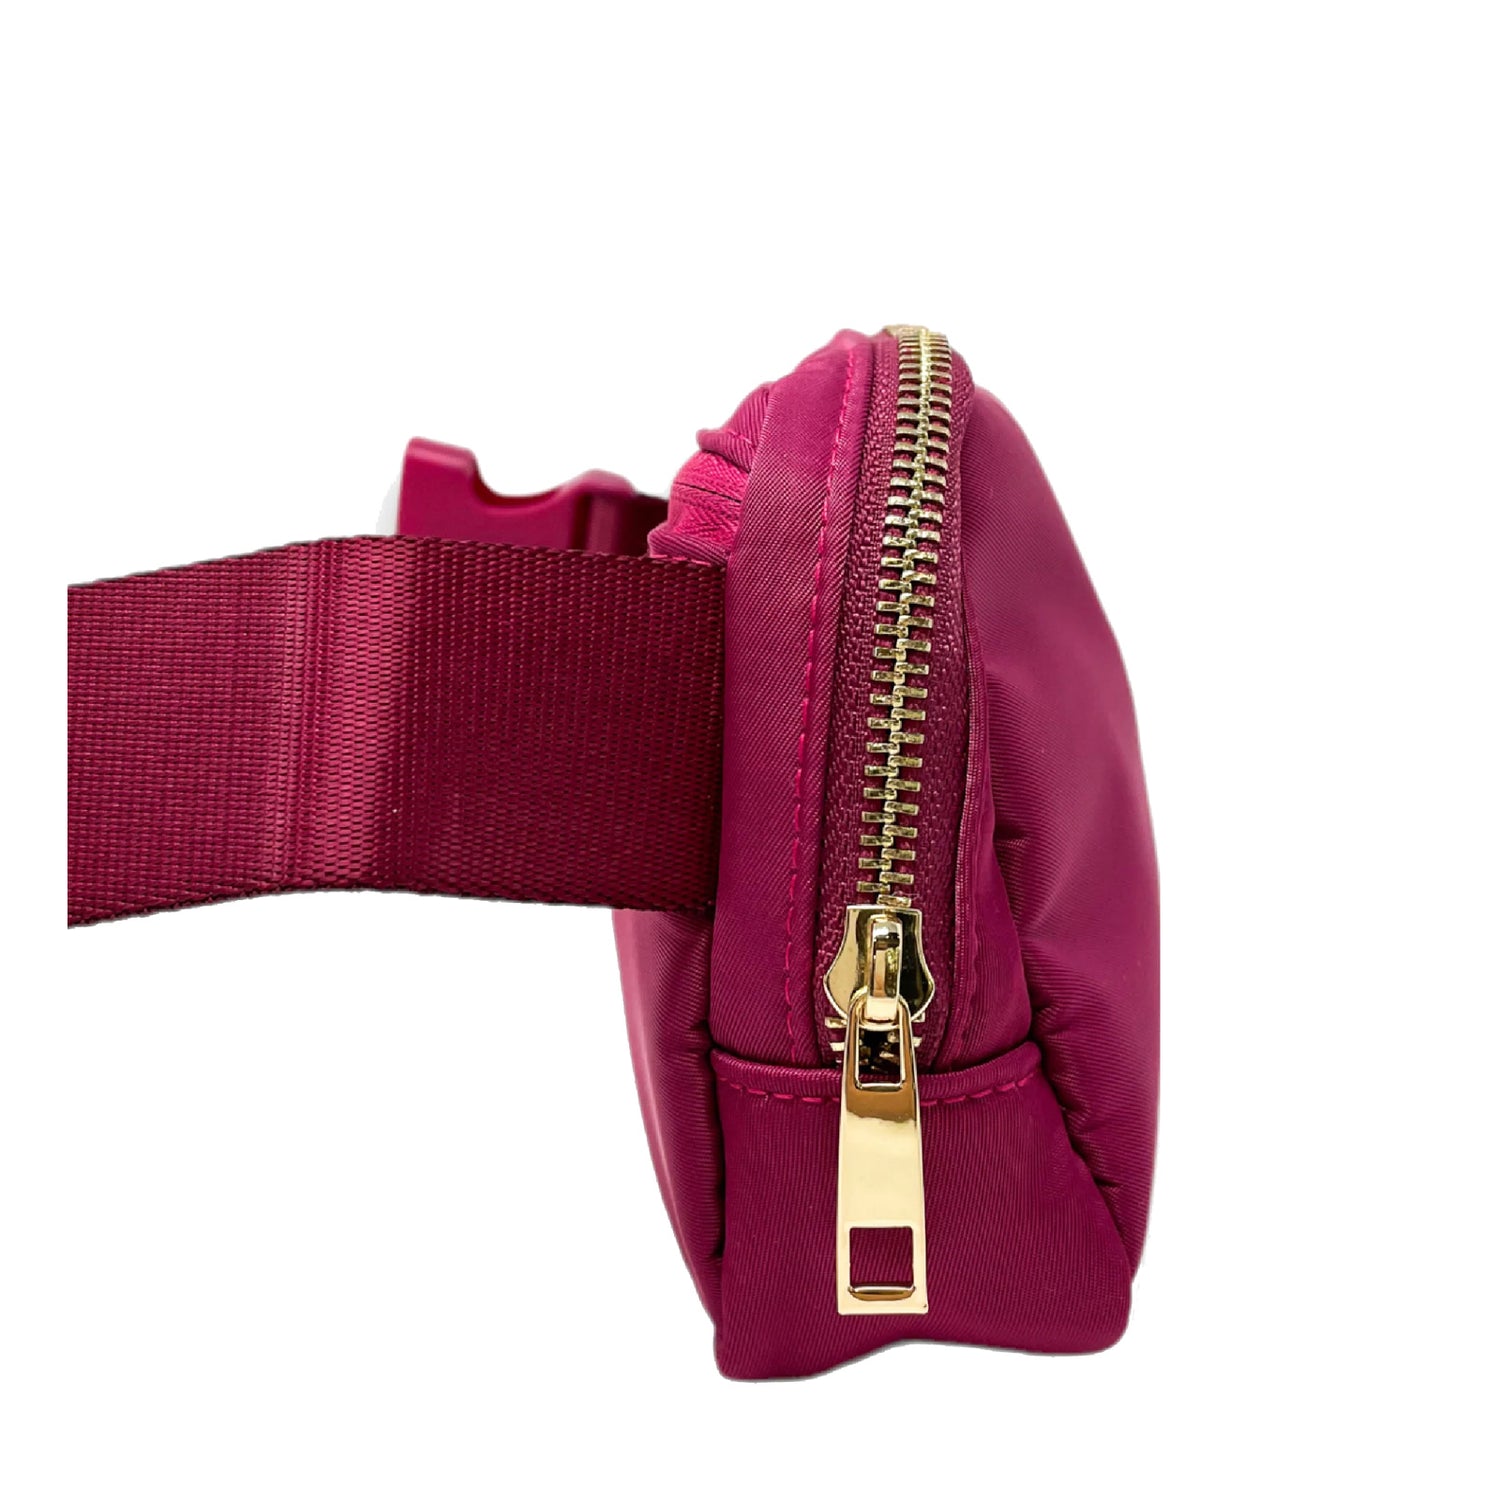 Peltz Shoes  Women's The Darling Effect All You Need Belt Bag with Hair Scarf Mulberry WSDE-BLTBAG-MBY